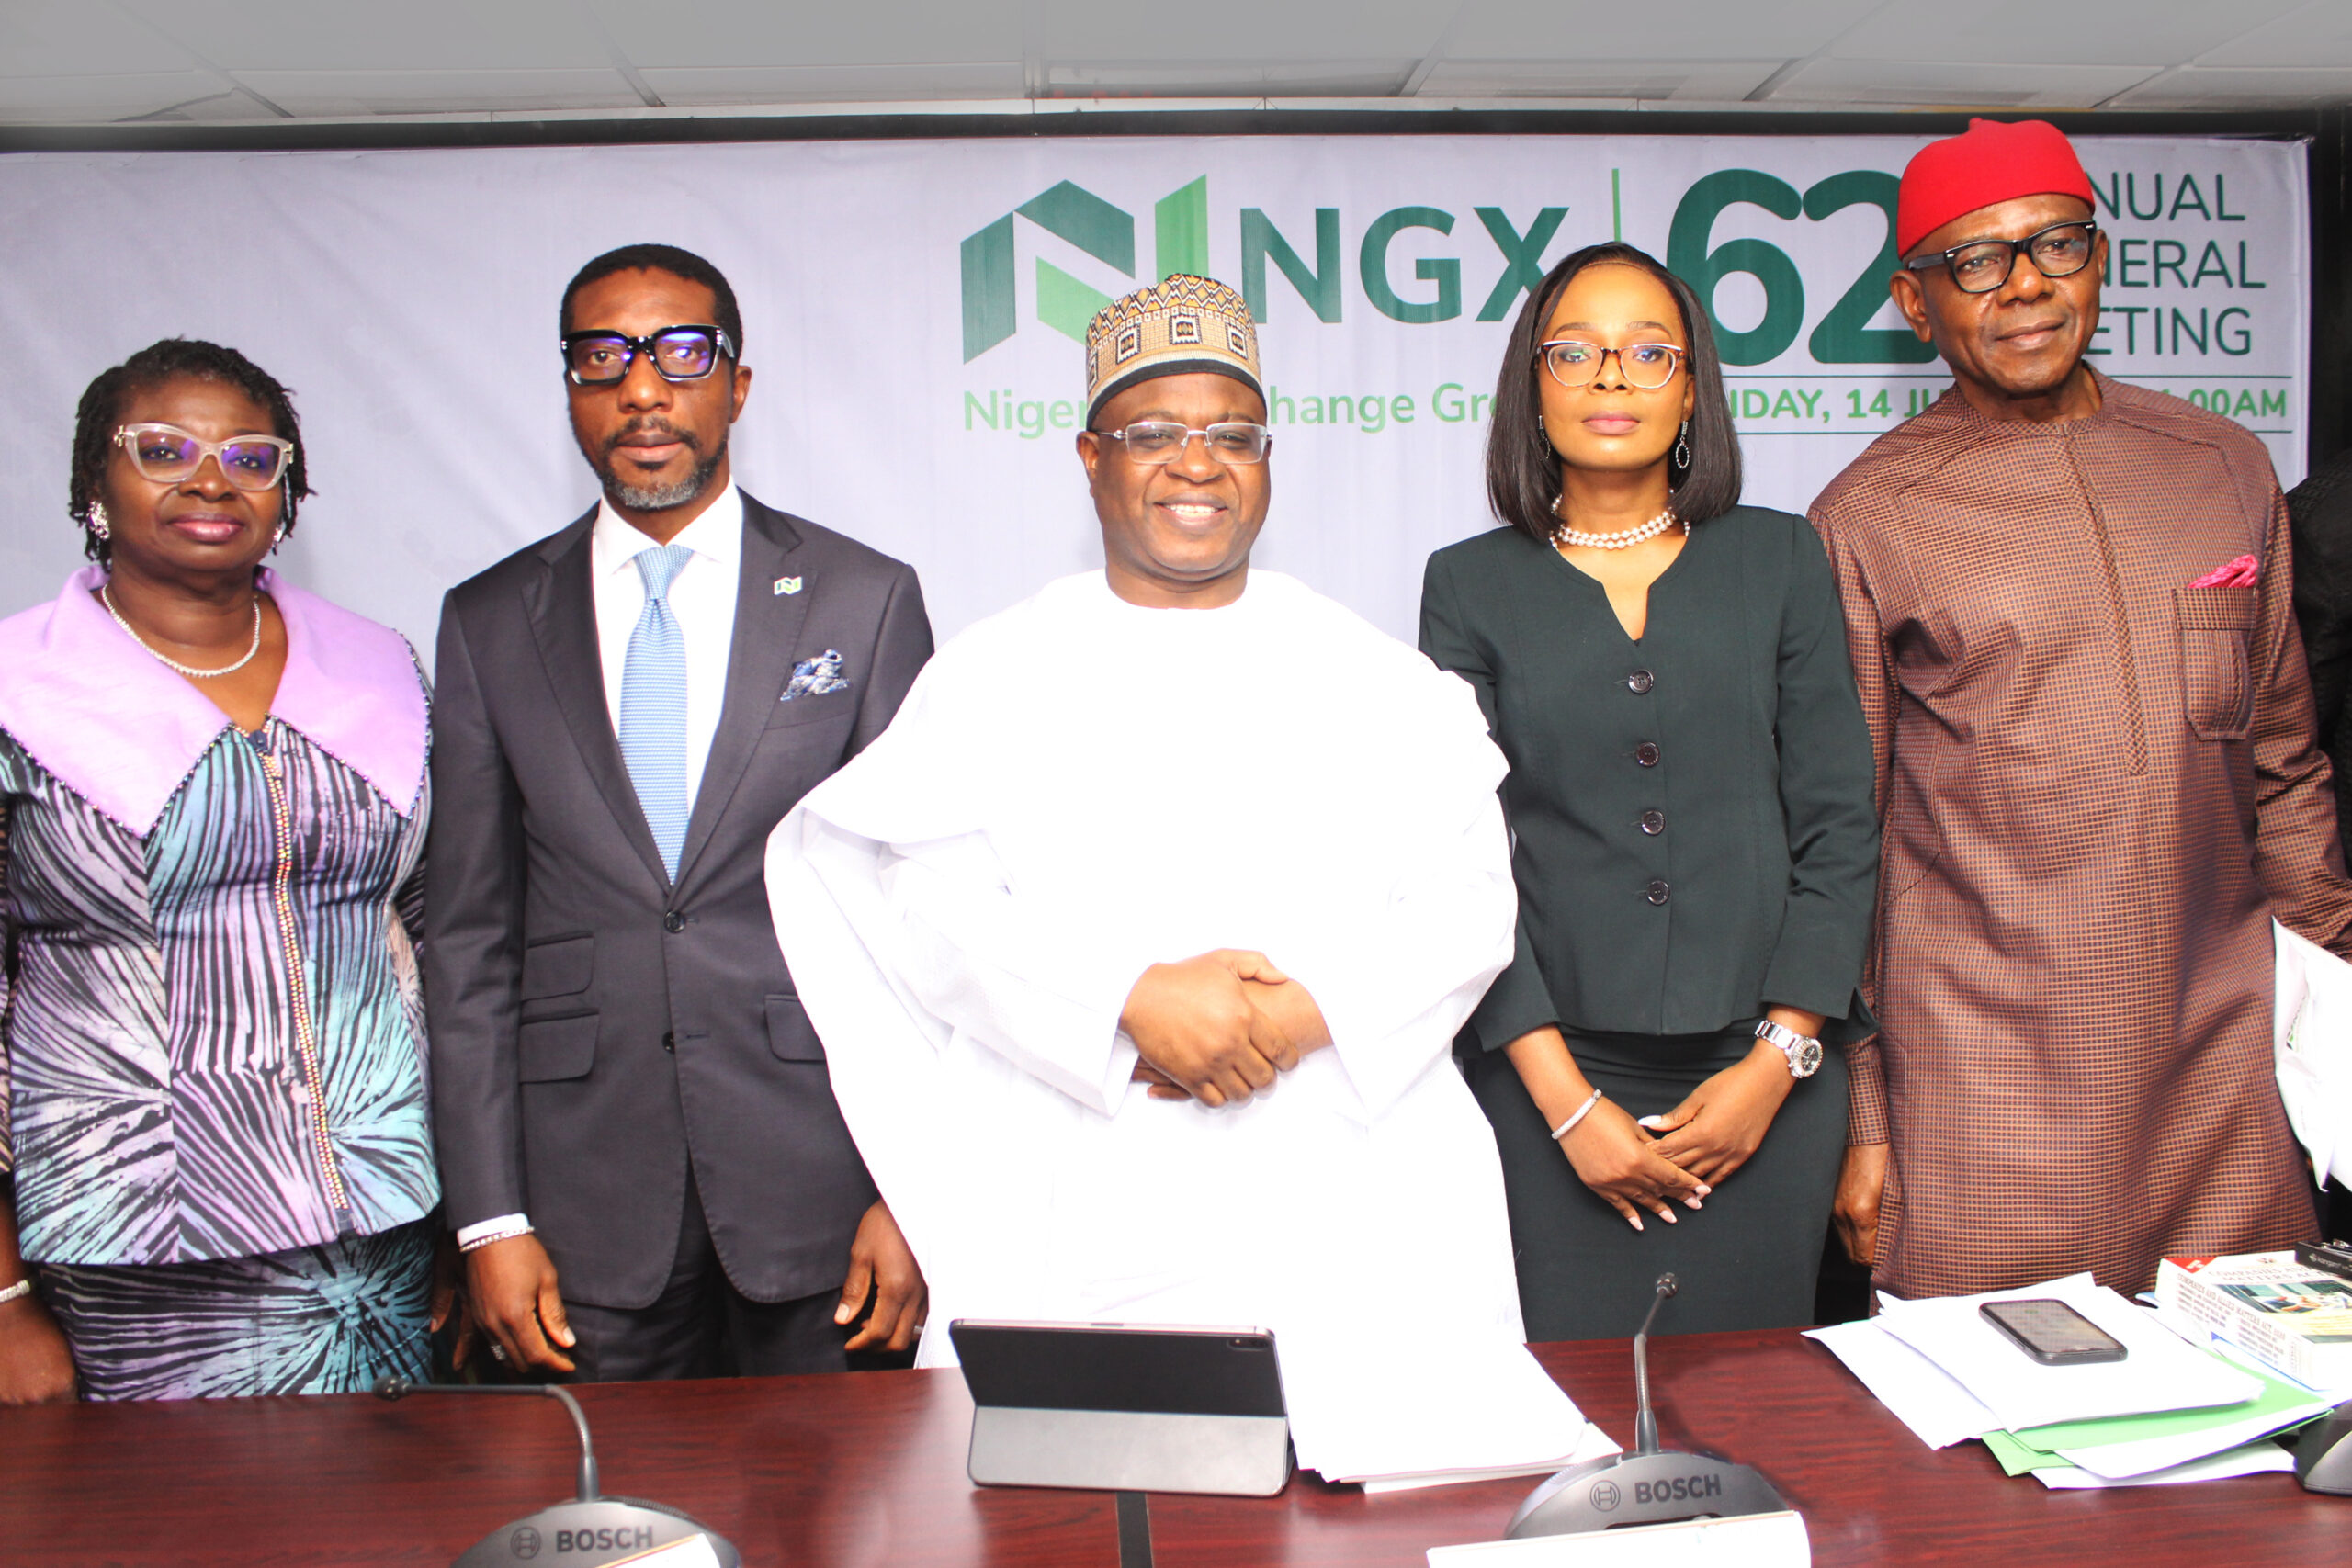 NGX Group during the 62nd Annual General Meeting